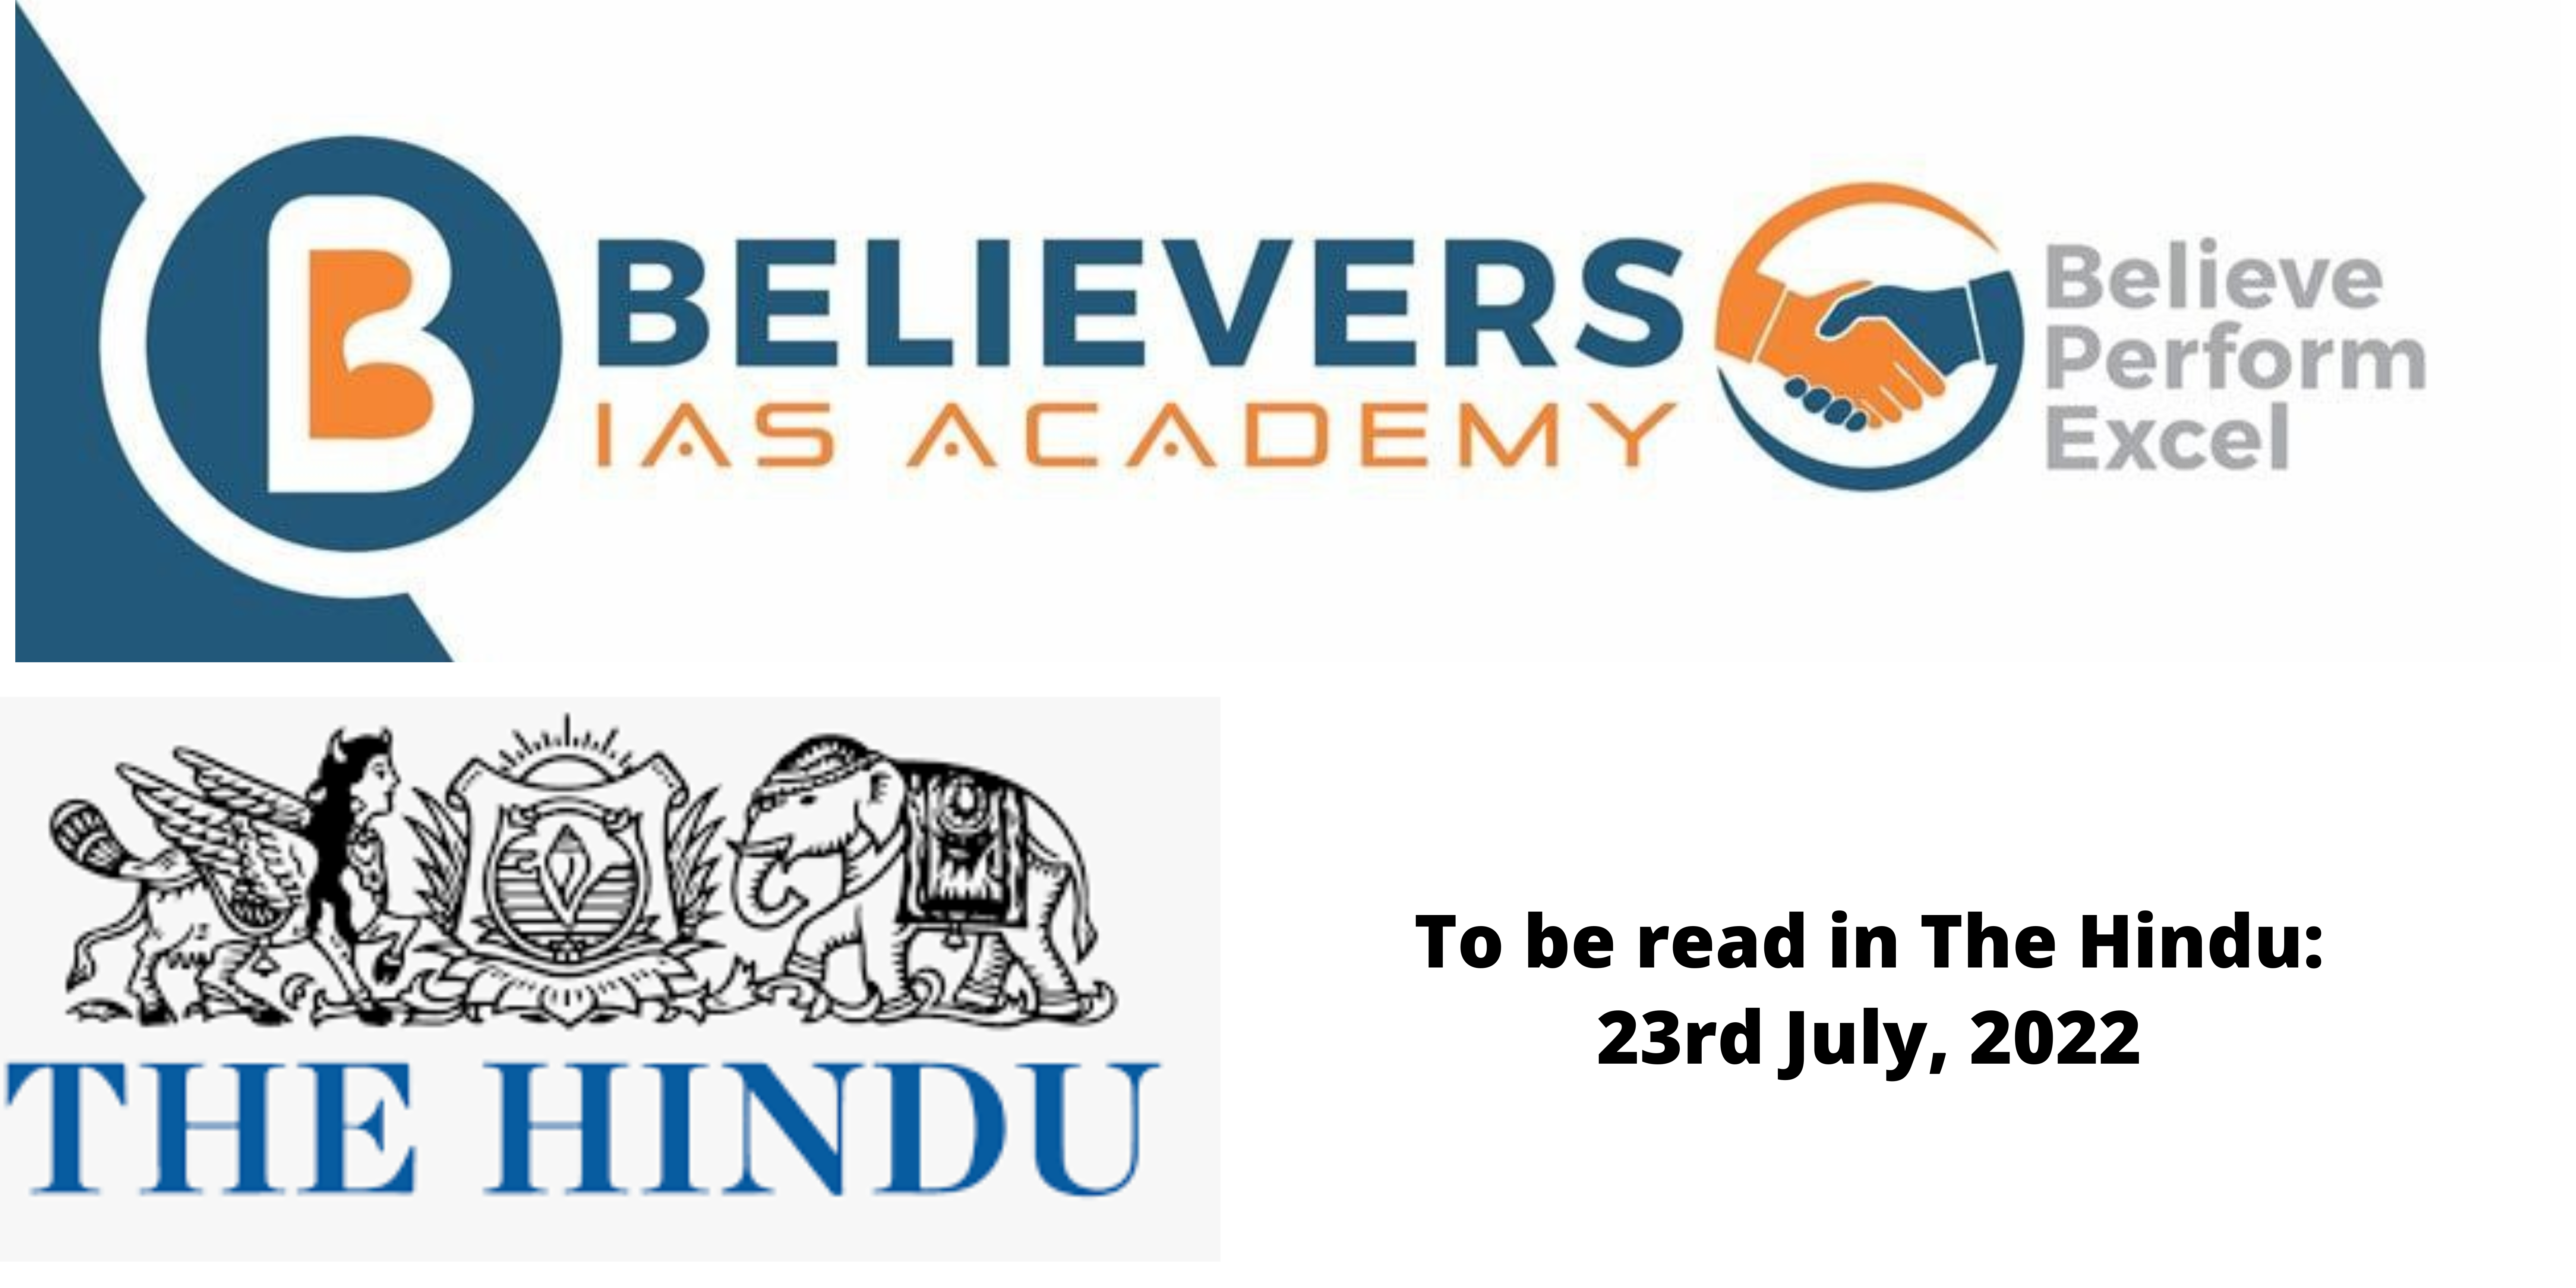 News articles for IAS Exam preparation - 23rd July, 2022